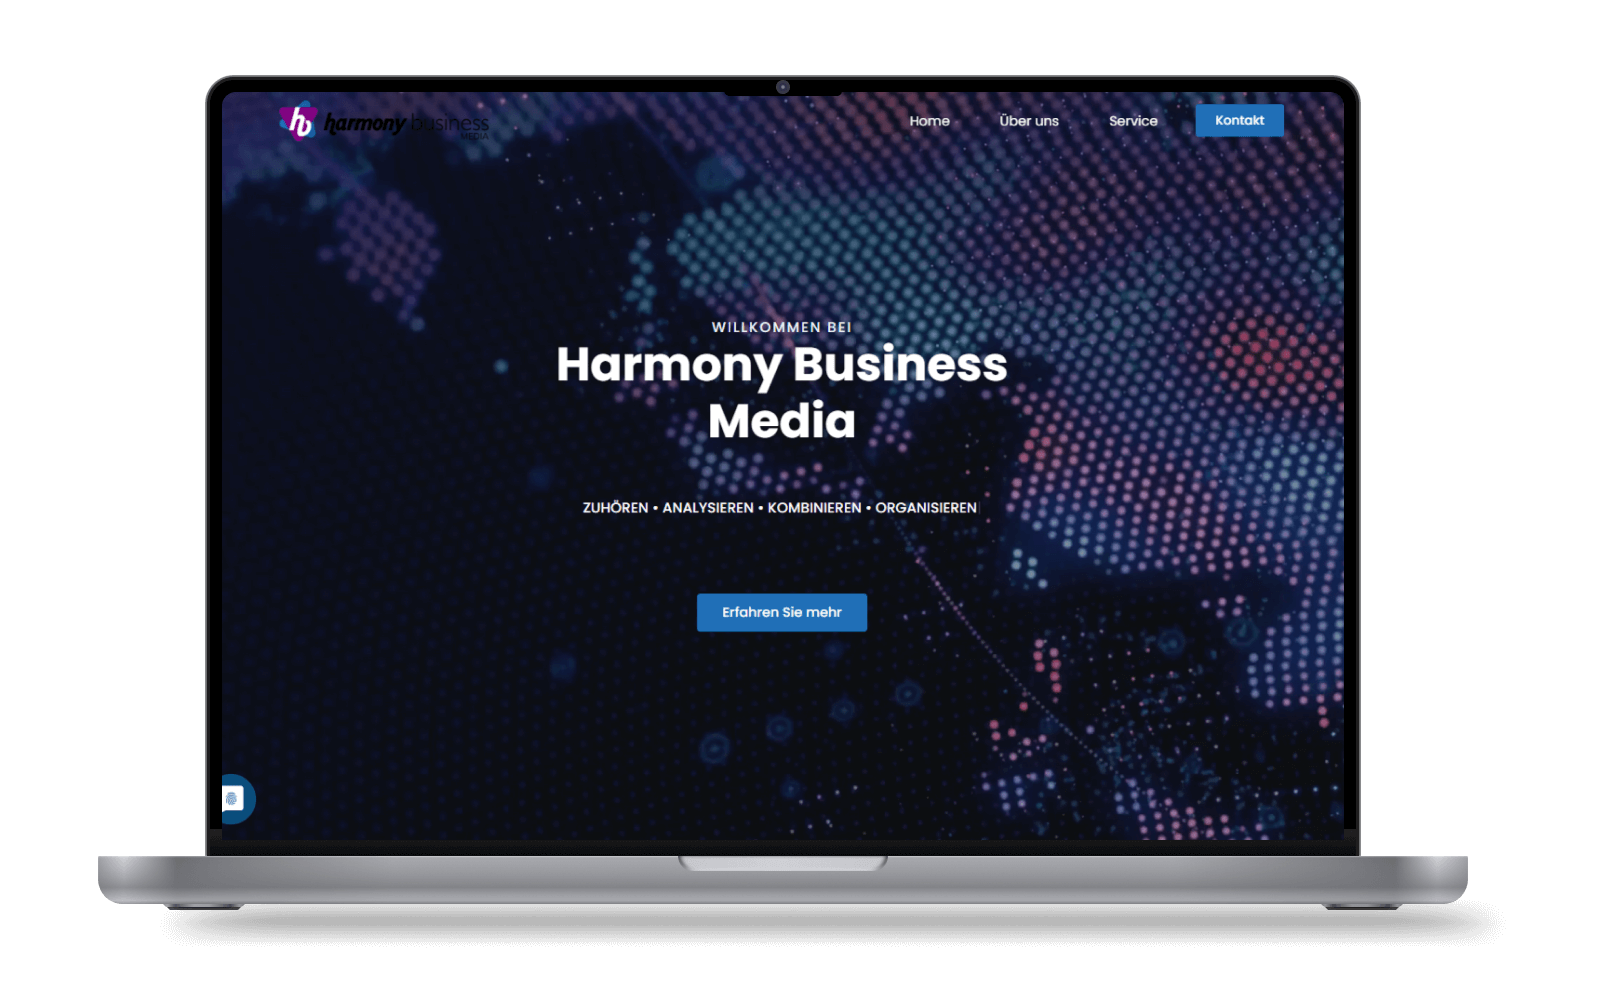 Media Harmonybusiness - Preview Card Image